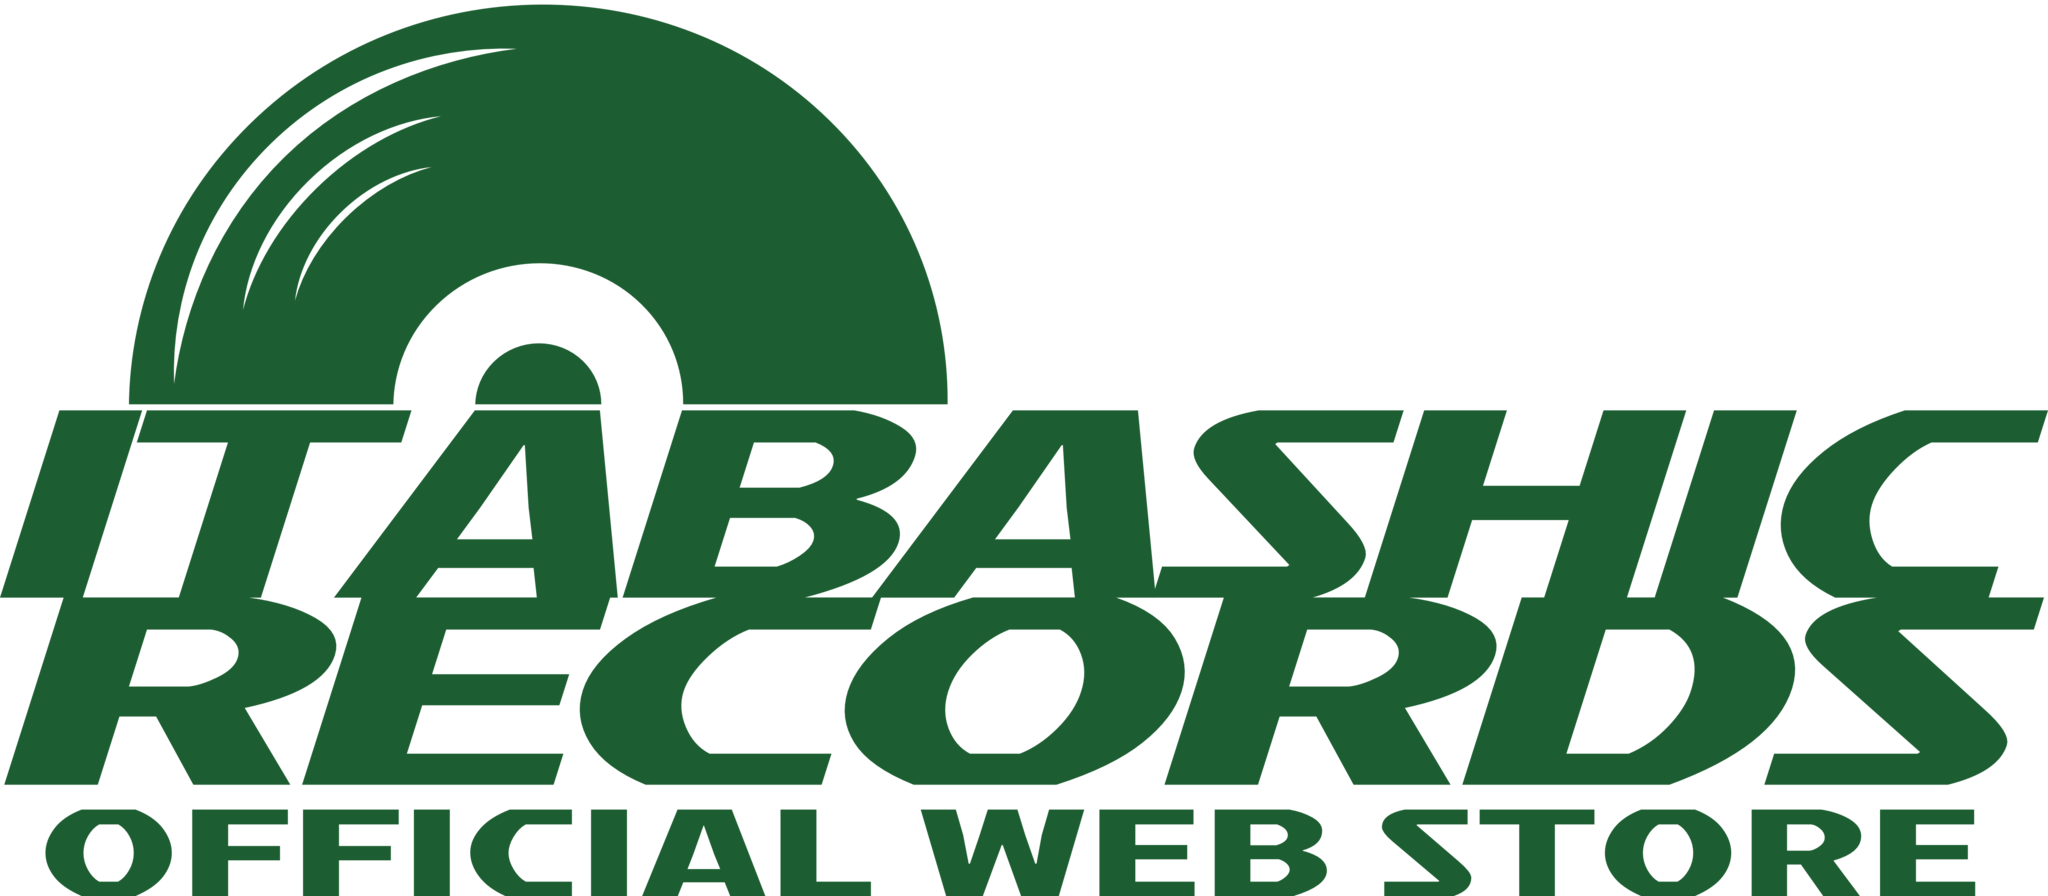 ITABASHIC RECORDS OFFICAL WEB STORE